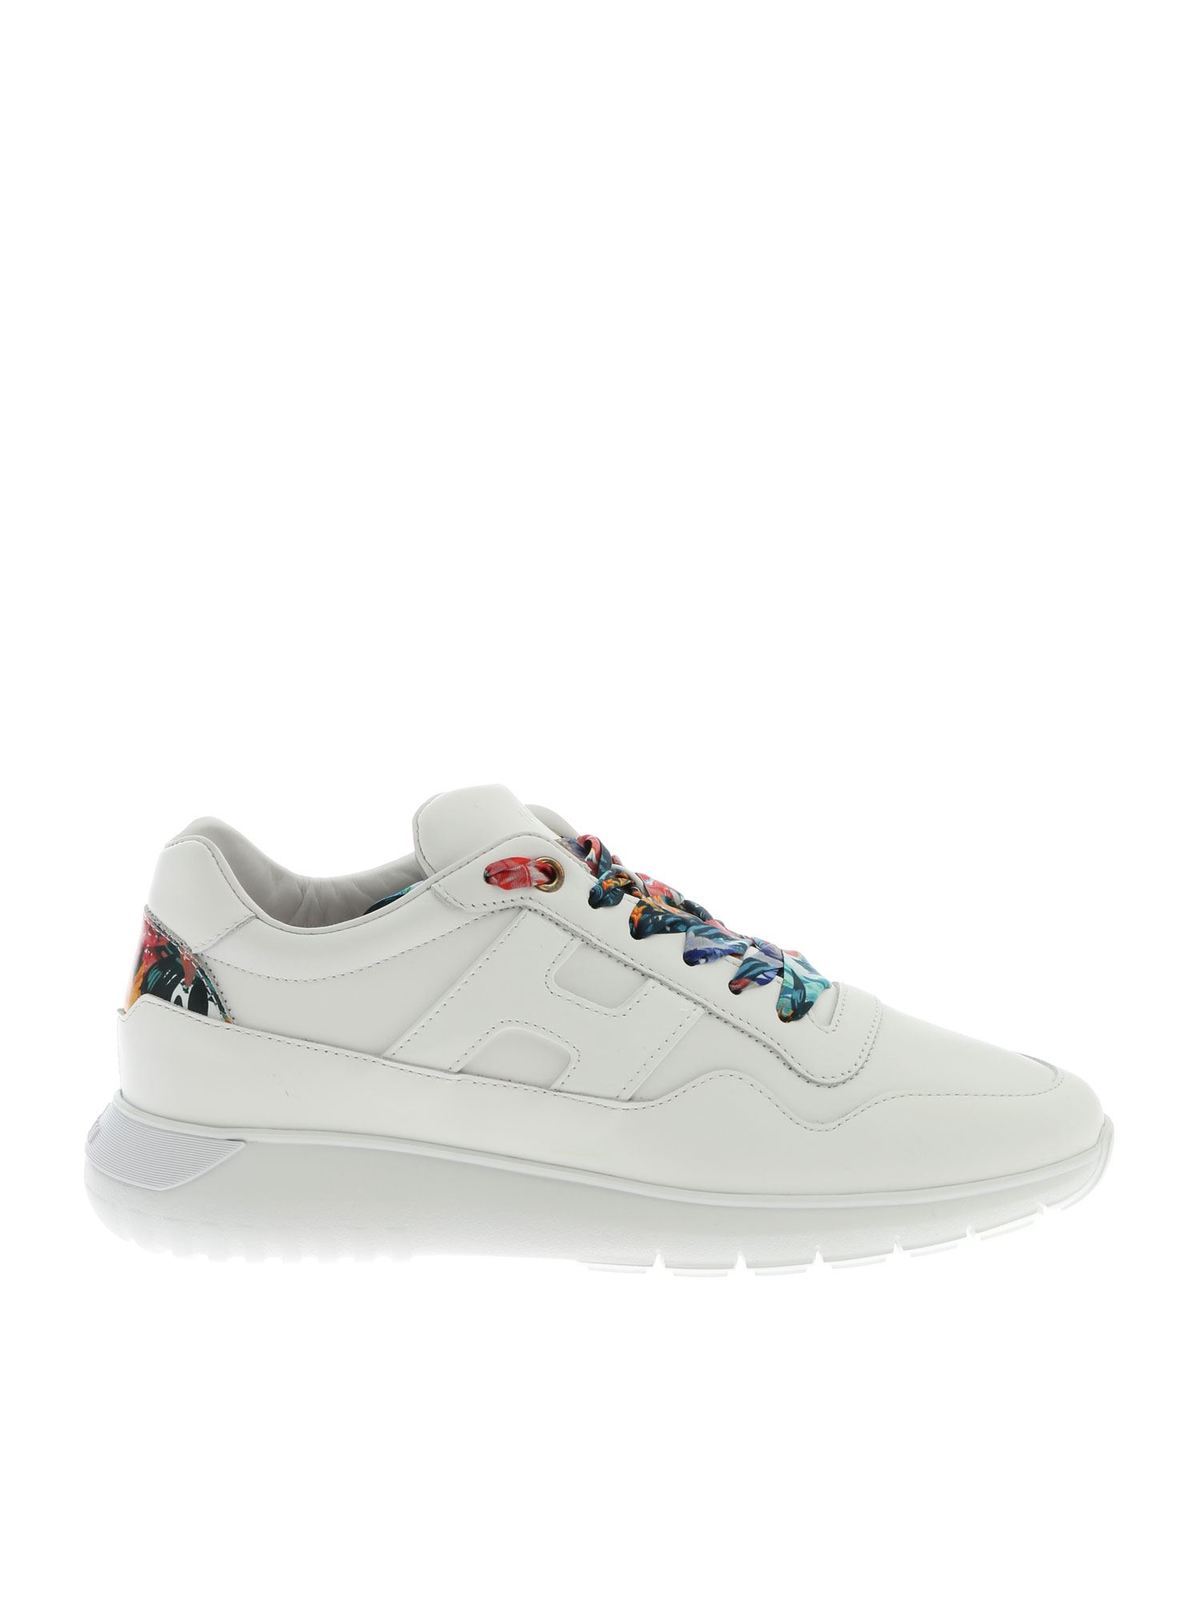 HOGAN H371 trainers WITH FLORAL DETAILS